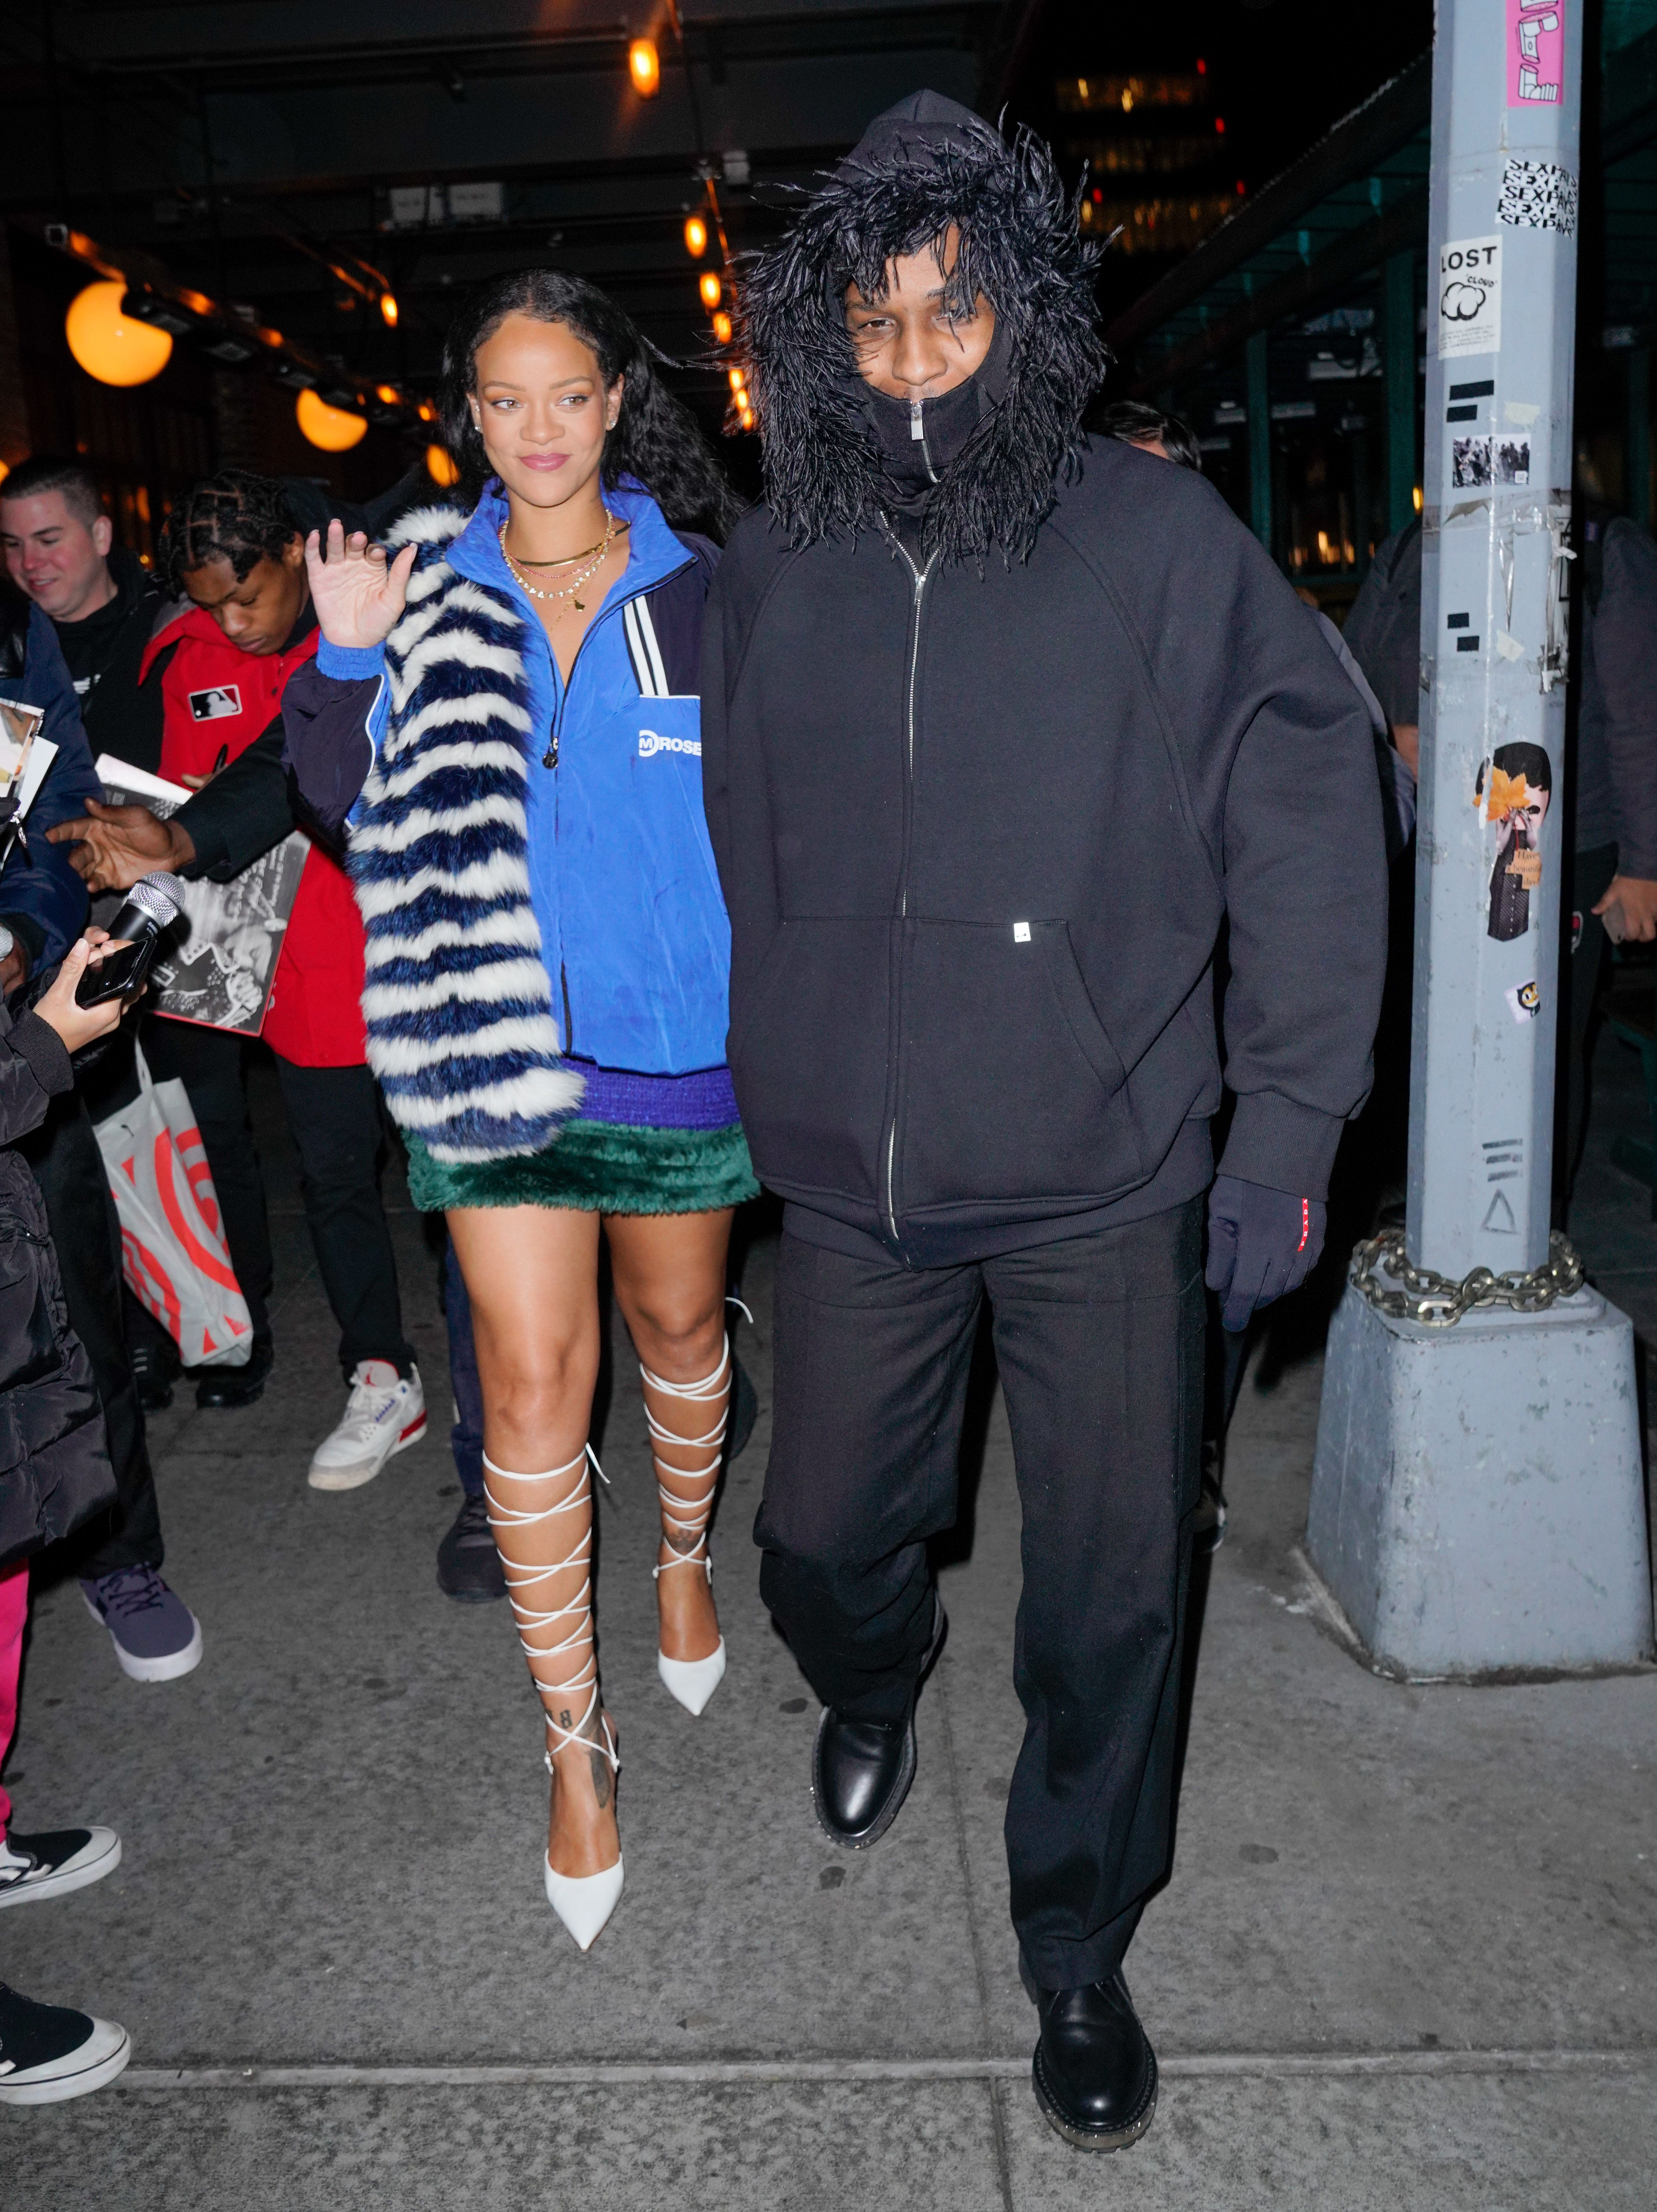 See Rihanna and A$AP Rocky Coordinate in Fur-Trimmed Outfits